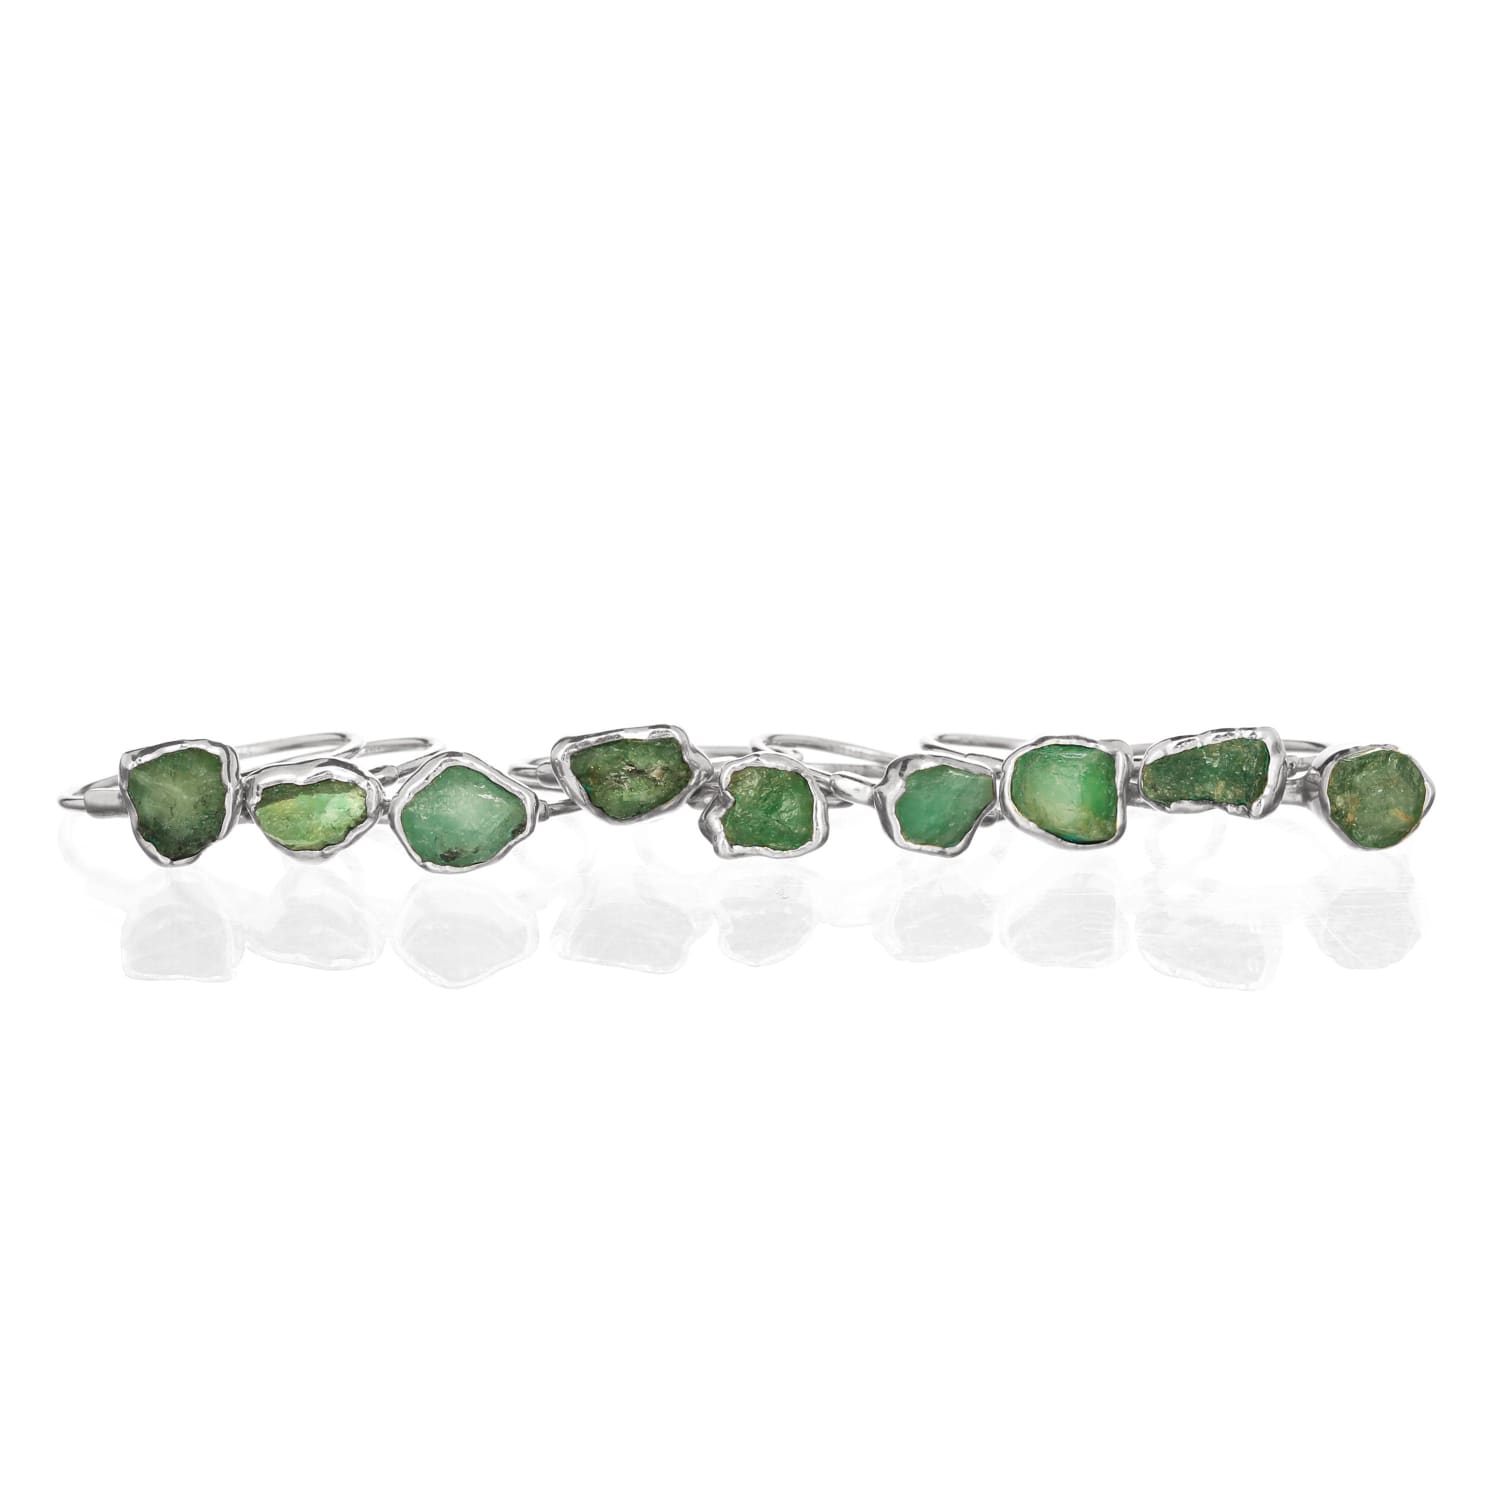 Raw Emerald Ring in Sterling Silver Gemstone Jewelry Rough